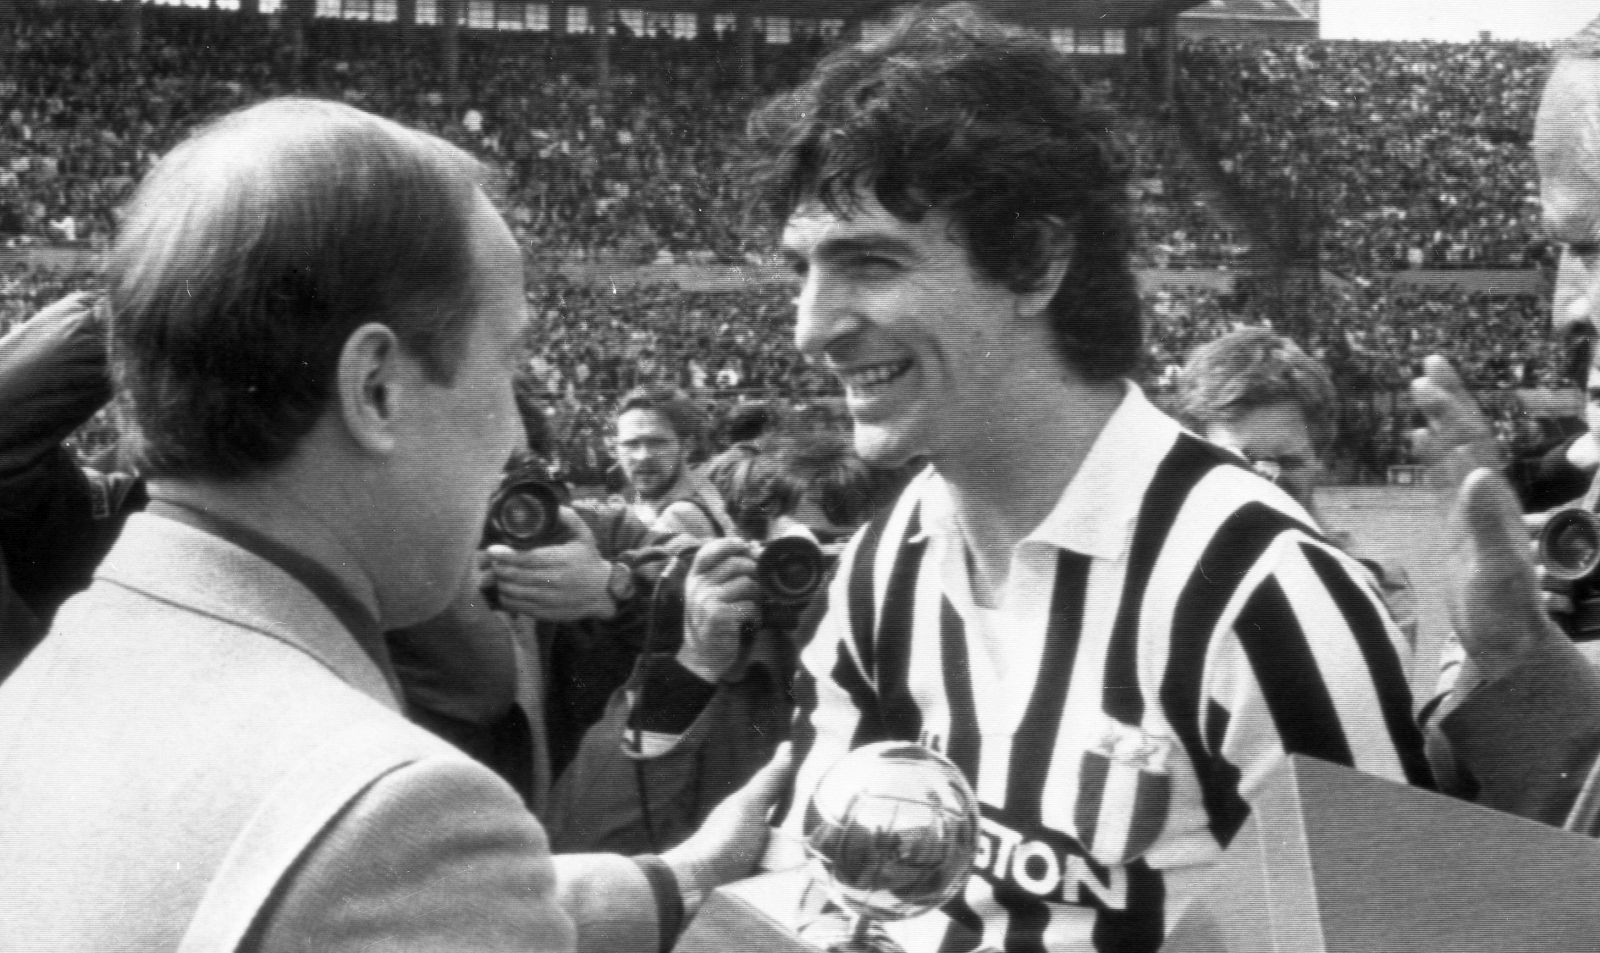 epa08874115 A picture made available on 10 December 2020 shows Juventus player Paolo Rossi (C) receiving Golden Ball (Ballon d'Or) from a France Football journalist, after the match Juventus-Inter, Turin, Italy, 01 May 1983. Paolo Rossi died aged 64 on 09 December 2020. As part of FIFA's 100th anniversary, in 2004 Rossi was named as one of the Top 125 greatest living footballers.  EPA/ANSA